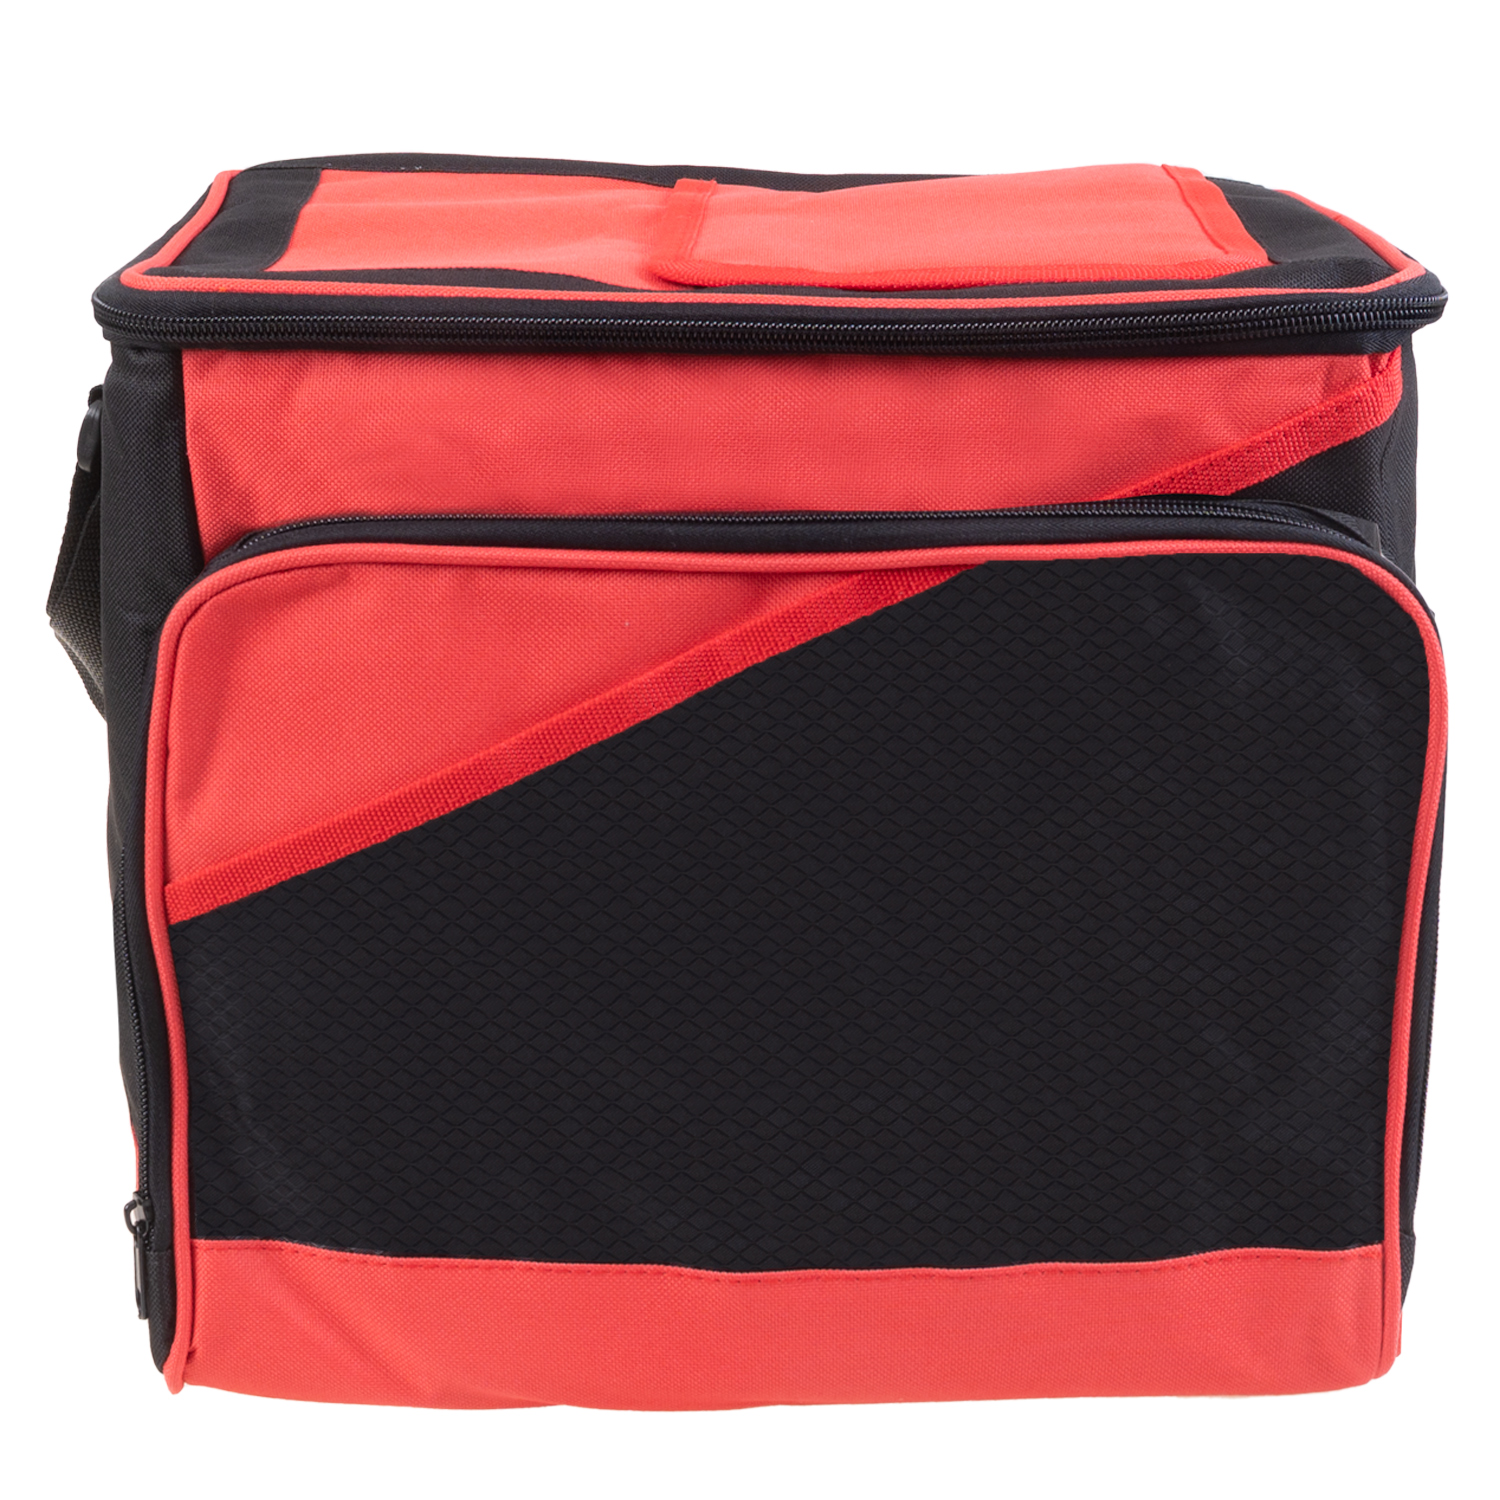 Grand sac isotherme, capacité 24 canettes - Rouge. Colour: red, Fr